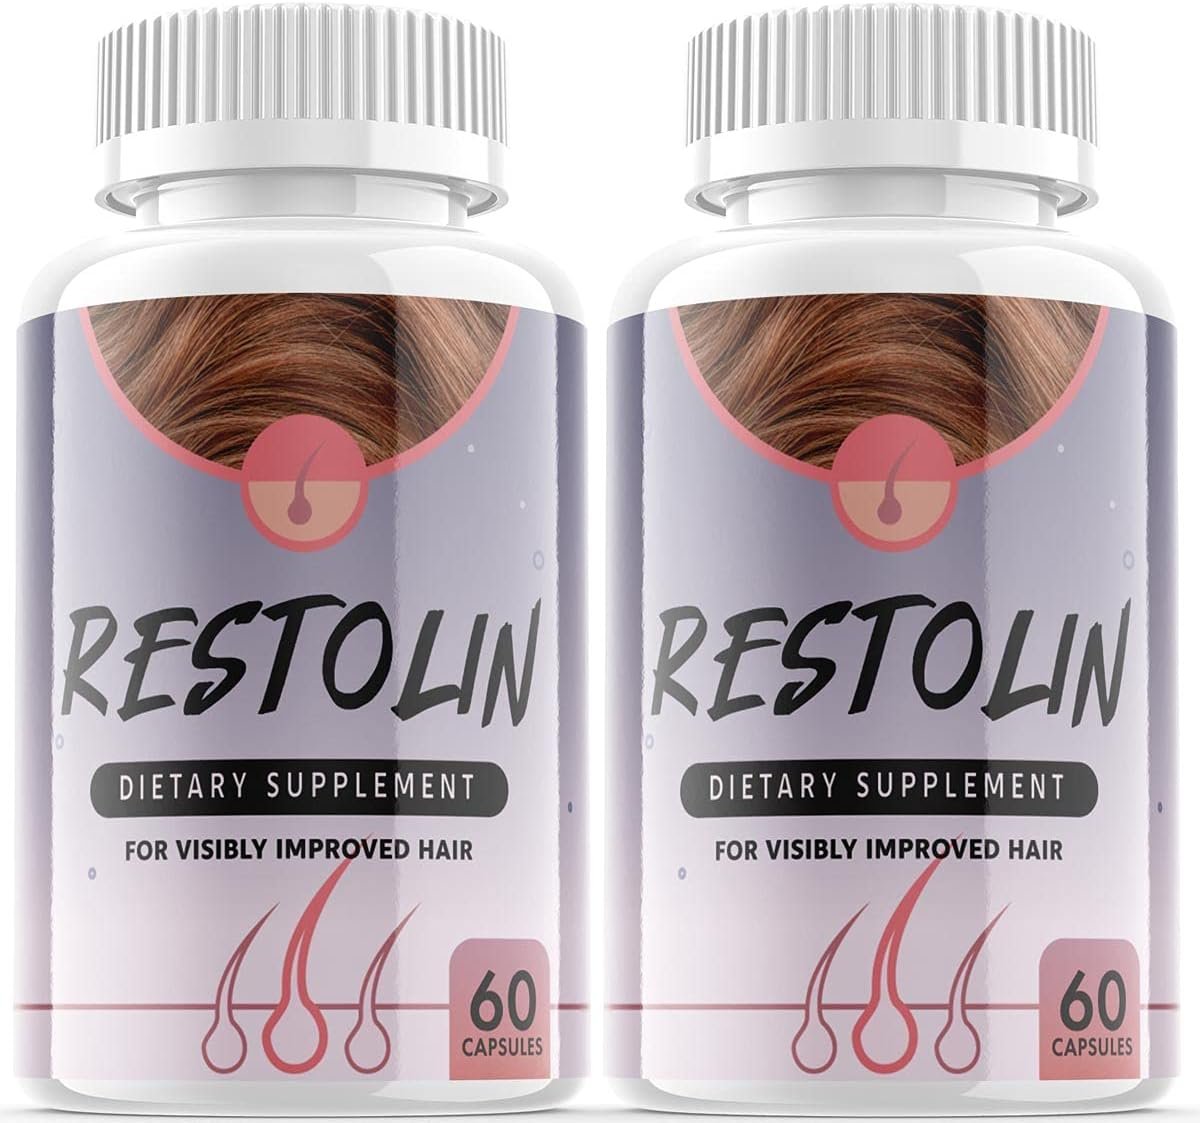 Restolin Hair Growth Pills Skin and Nails Supplement - Advanced Unique Hair Growth (2 Pack)